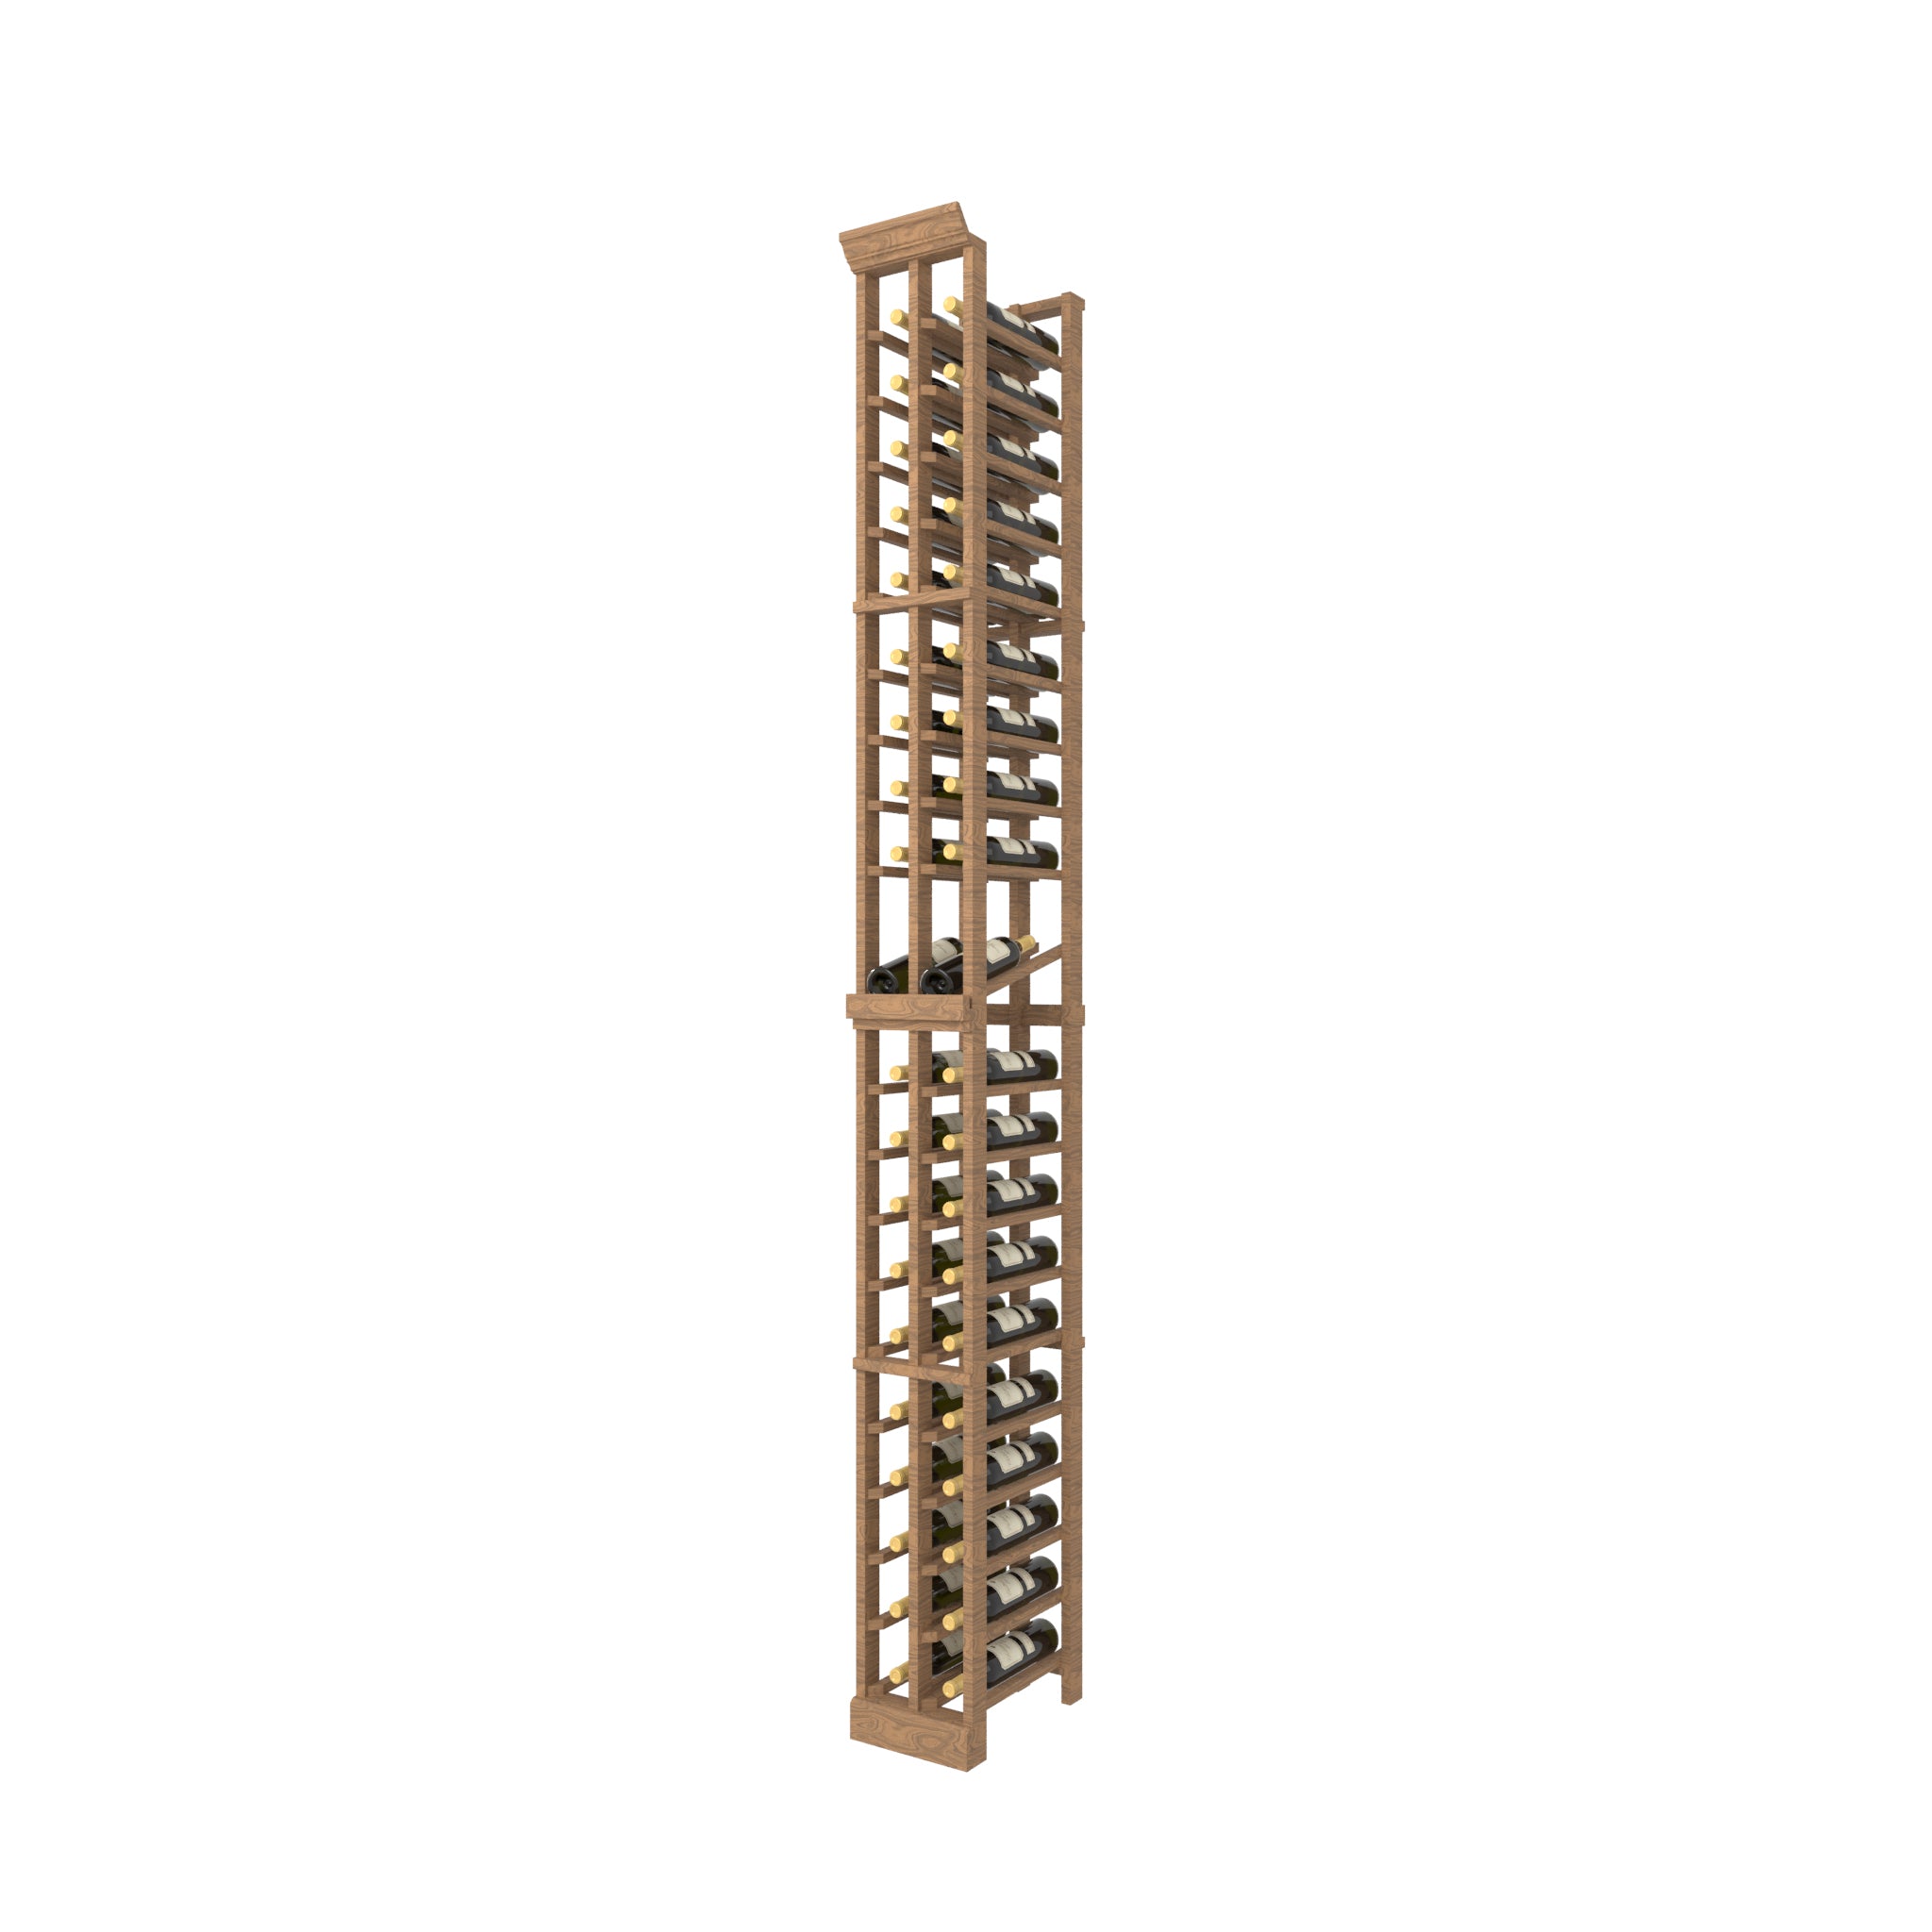 Individual full bottle wood Wine Rack with a display row - 02 Column, Ice wine